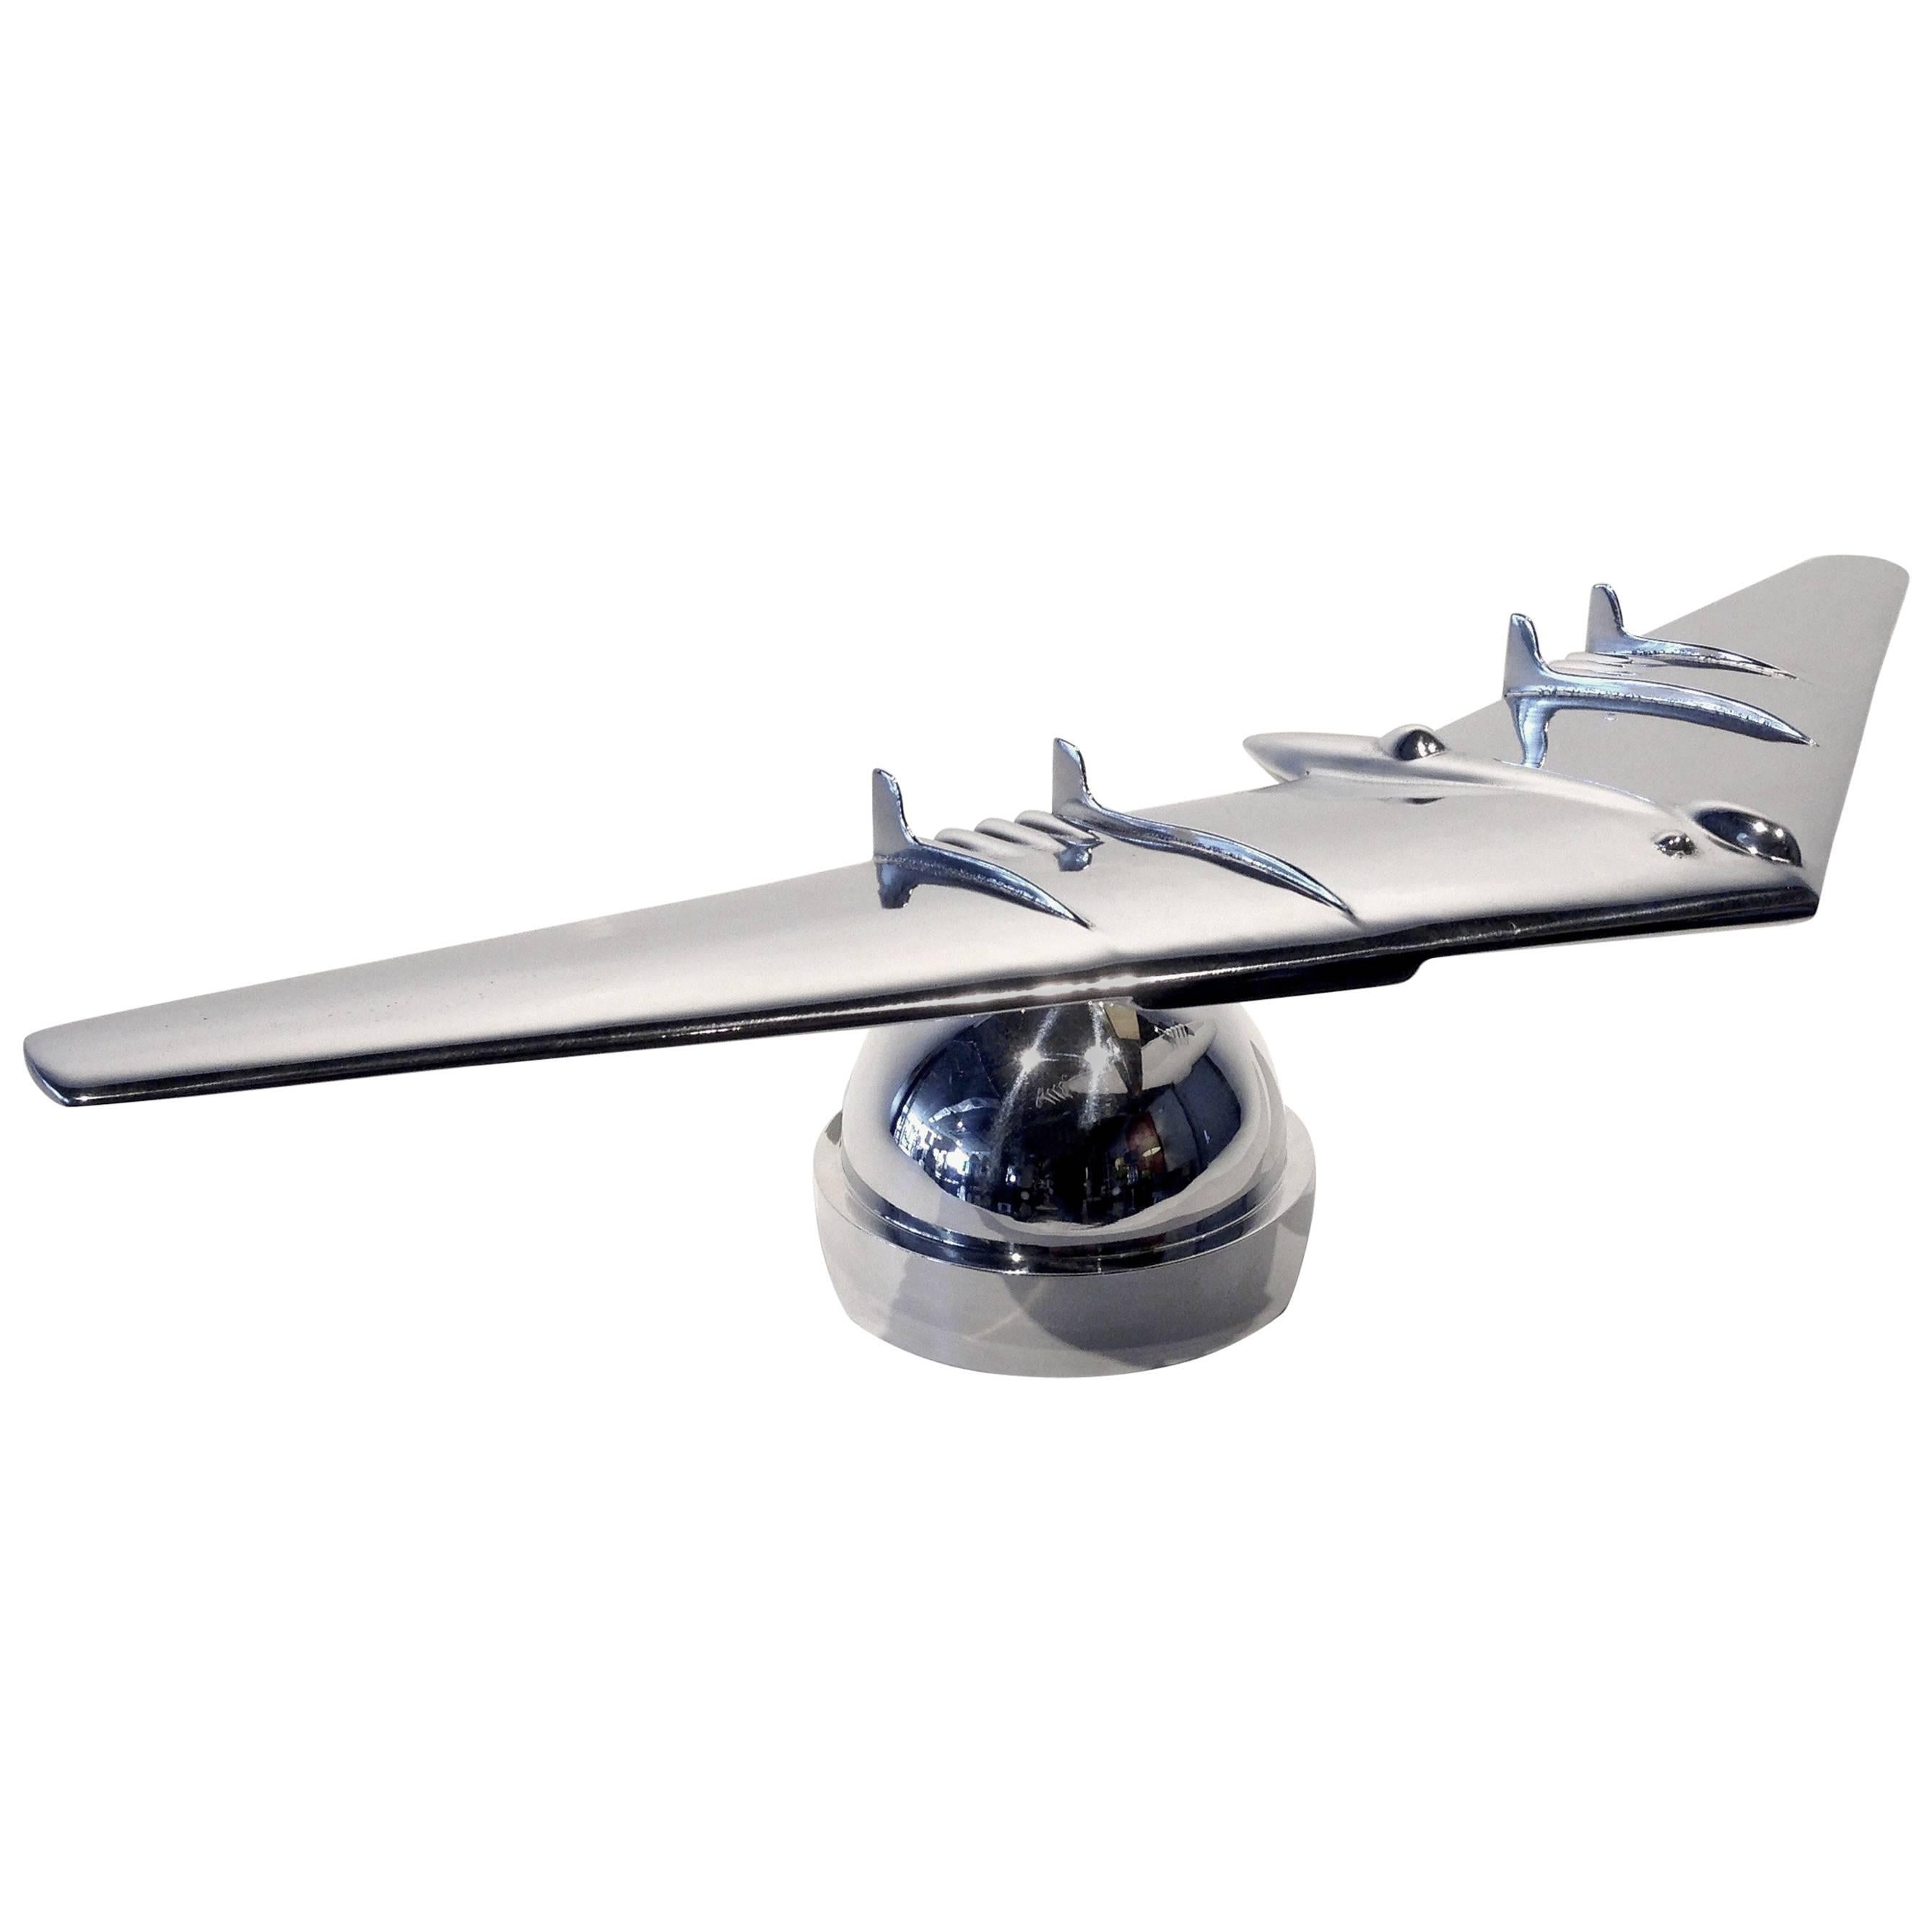 YB-49 Flying Wing Chromed Steel and Brass Sculpture By Phil Miller C. 2015 For Sale